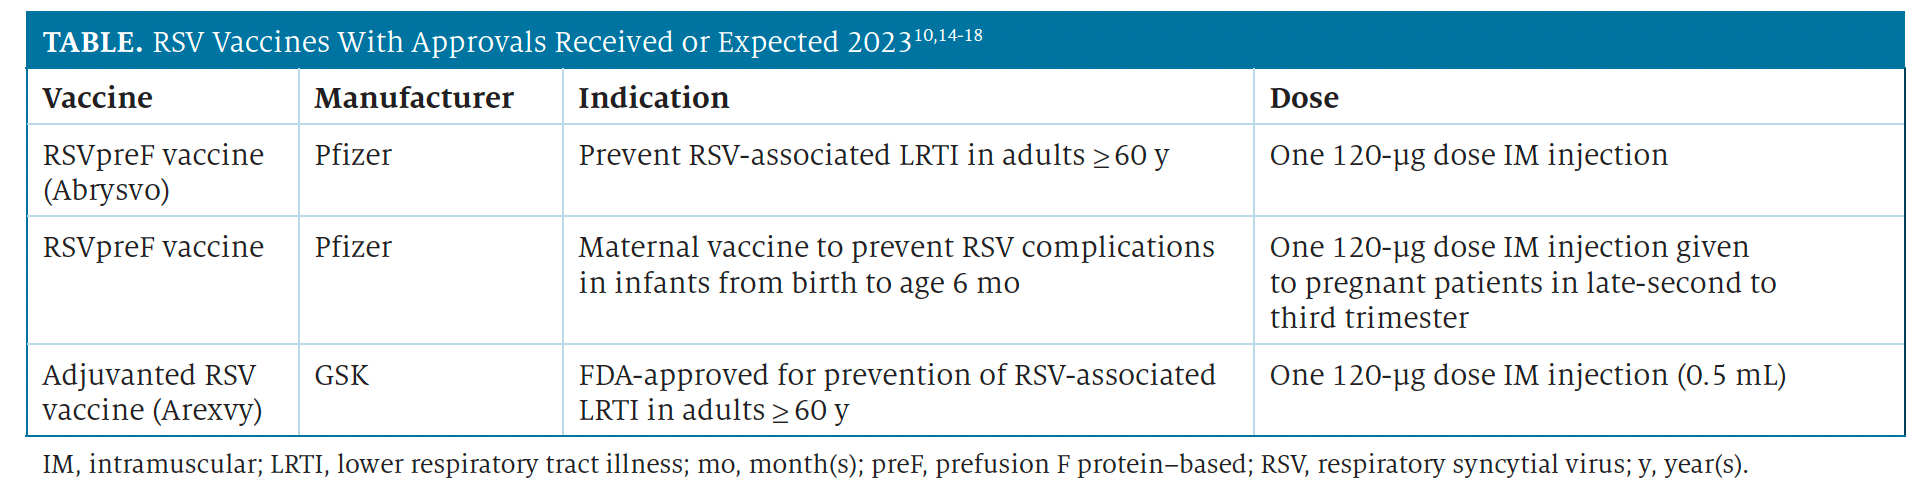 RSV Vaccines With Approvals Received or Expected 2023